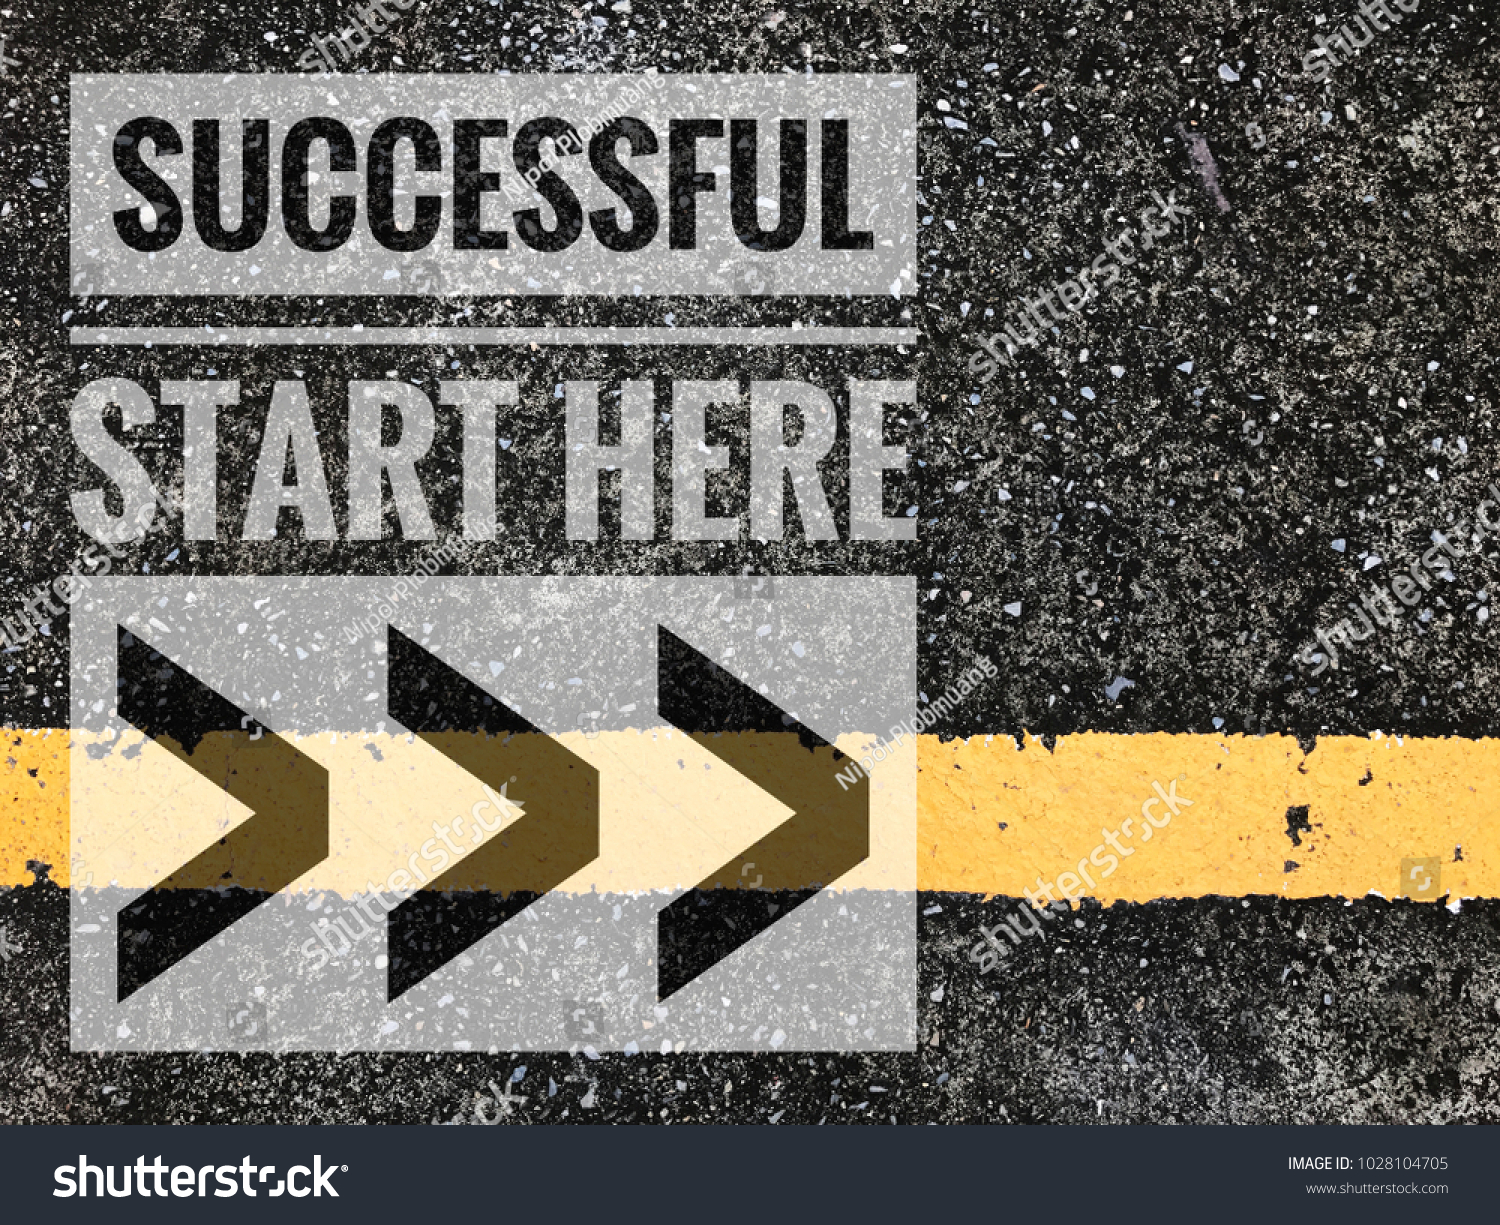 Successful start here words on Yellow line with asphalt road texture background. #1028104705